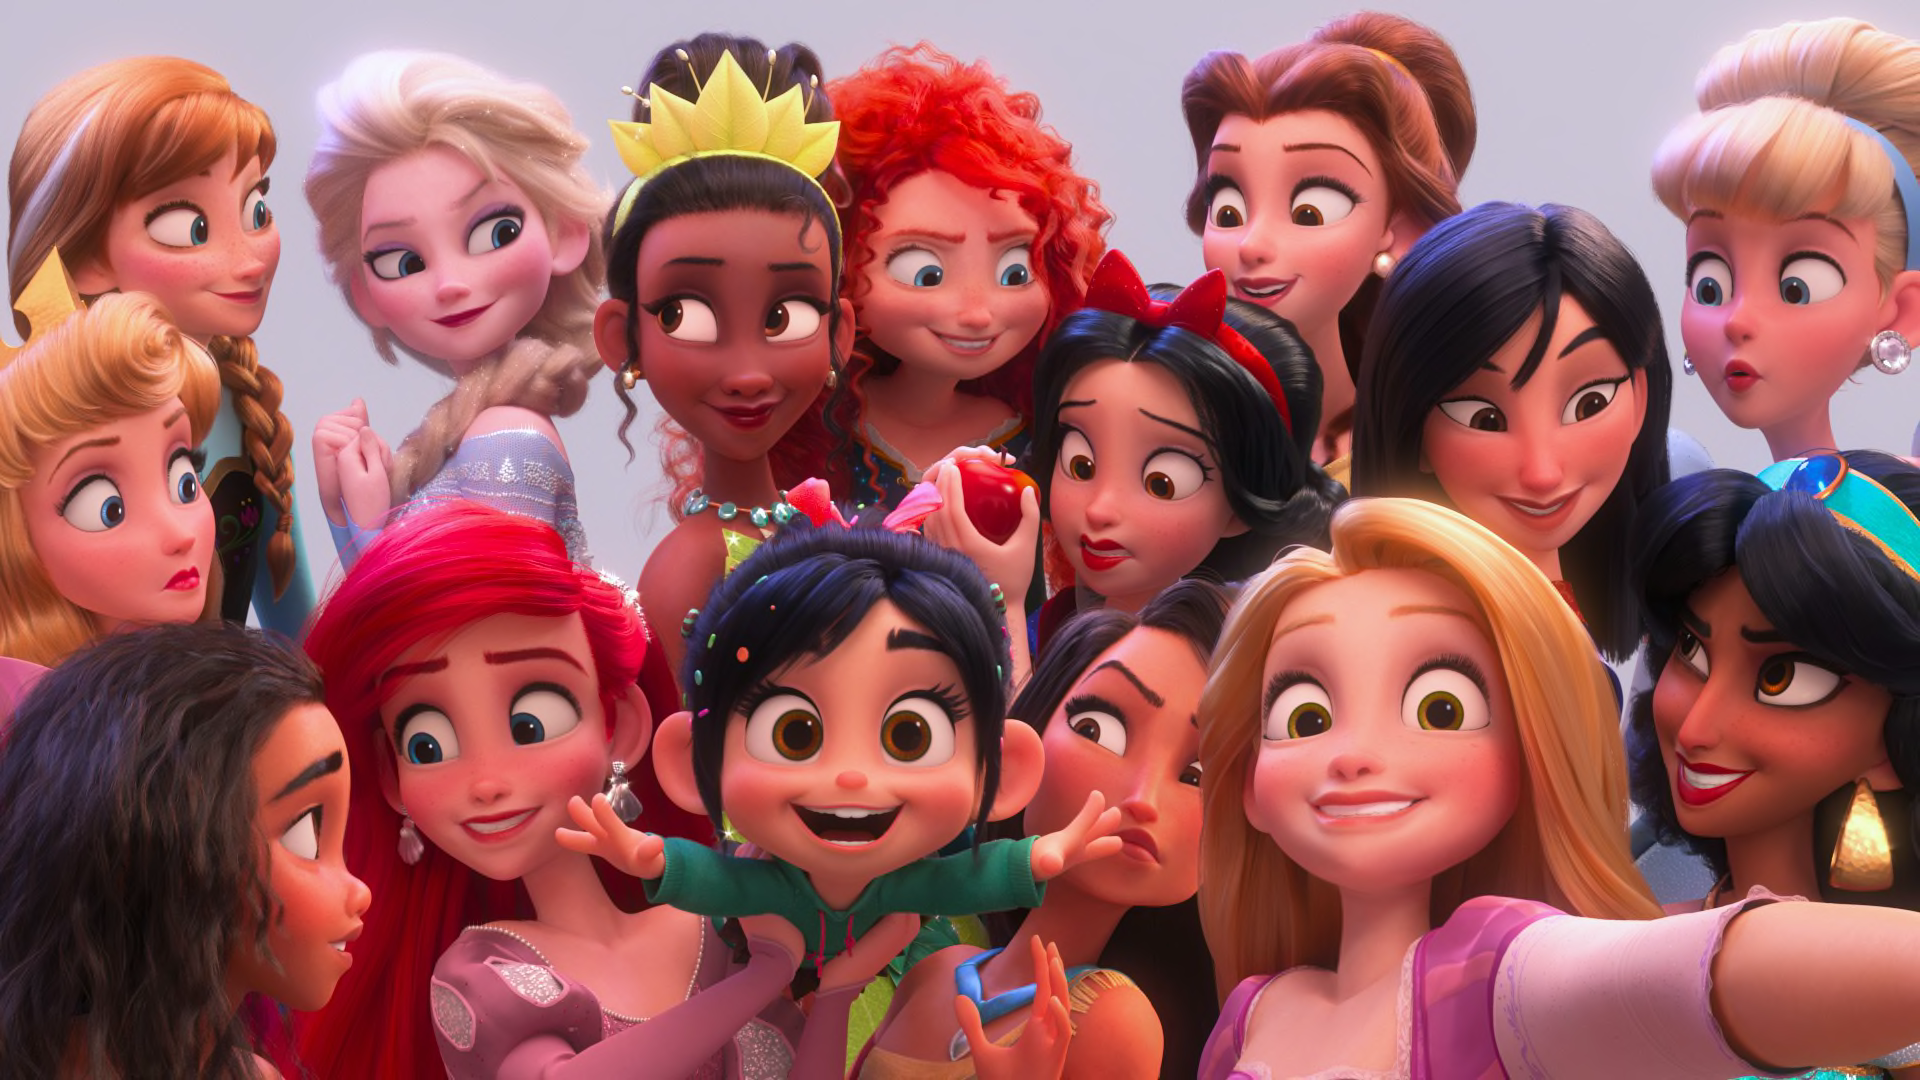 15 most empowering female Disney characters of all-time